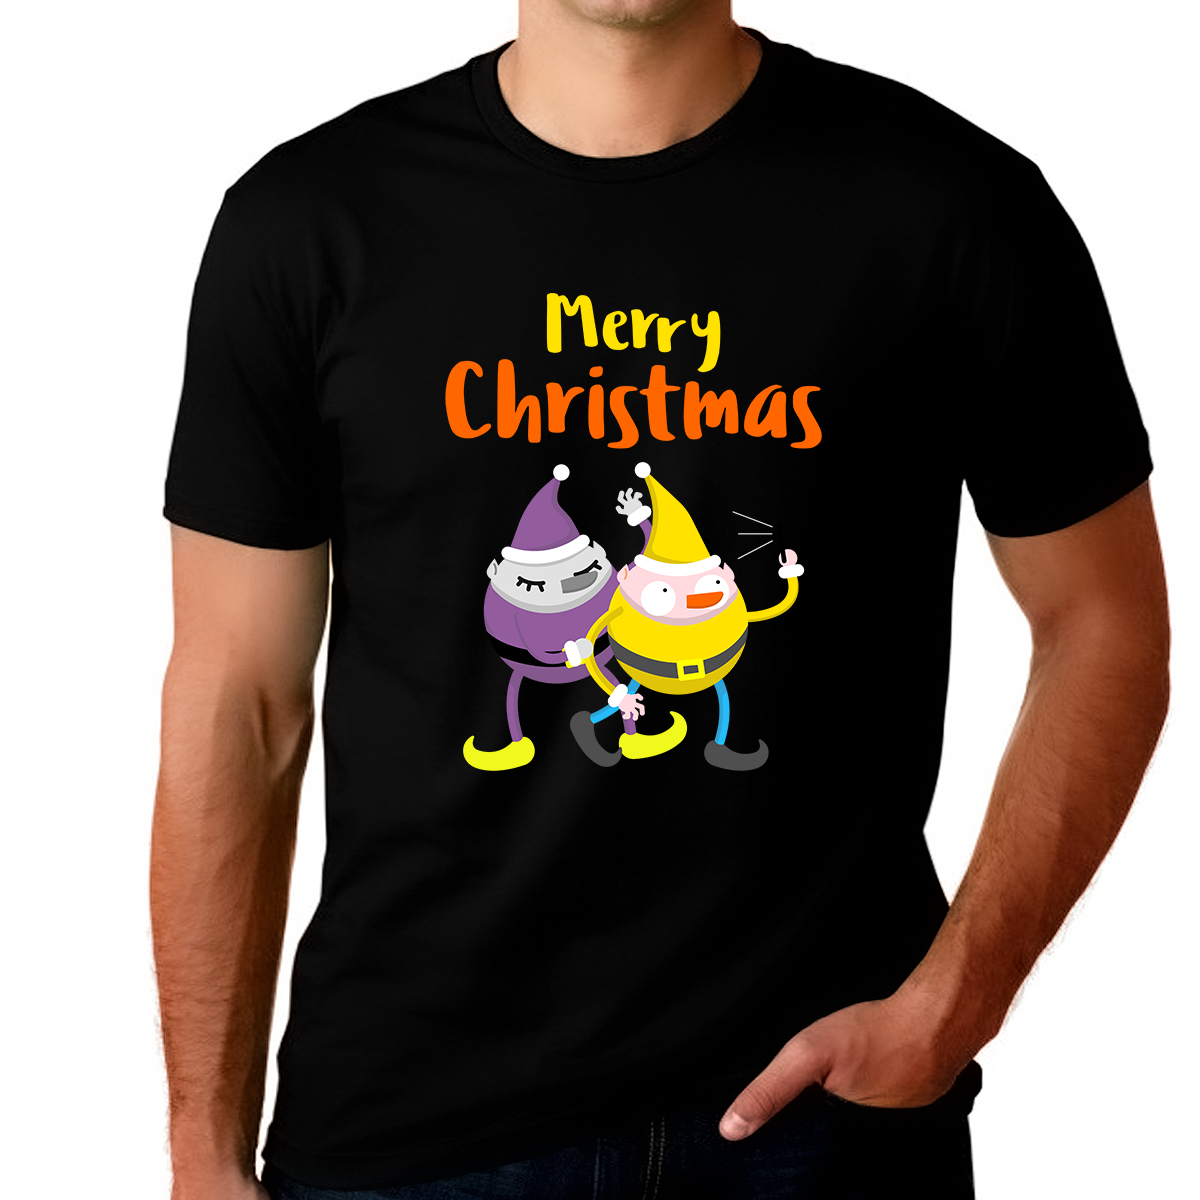 Funny Elfs Funny Plus Size Christmas Shirts for Men Big and Tall Christmas Clothes for Men Plus Size